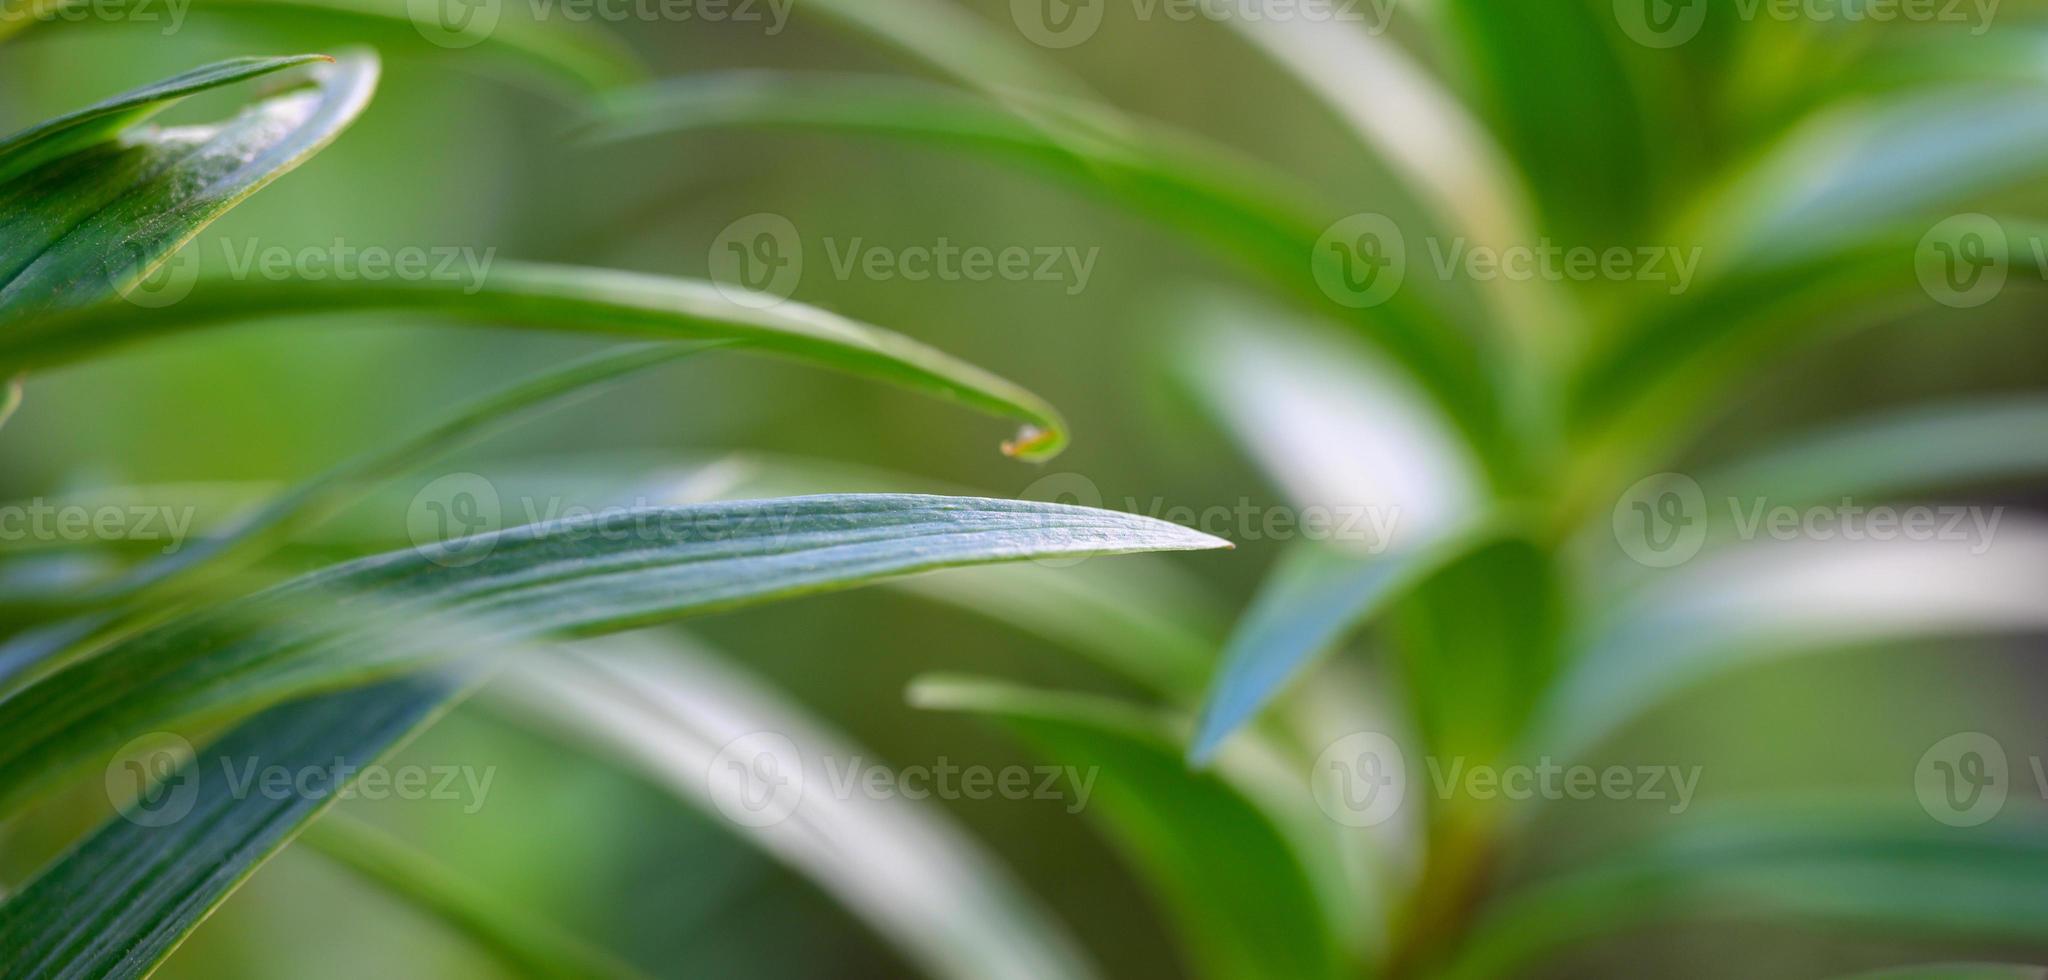 abstract background banner of leaves and stems of lilies photo